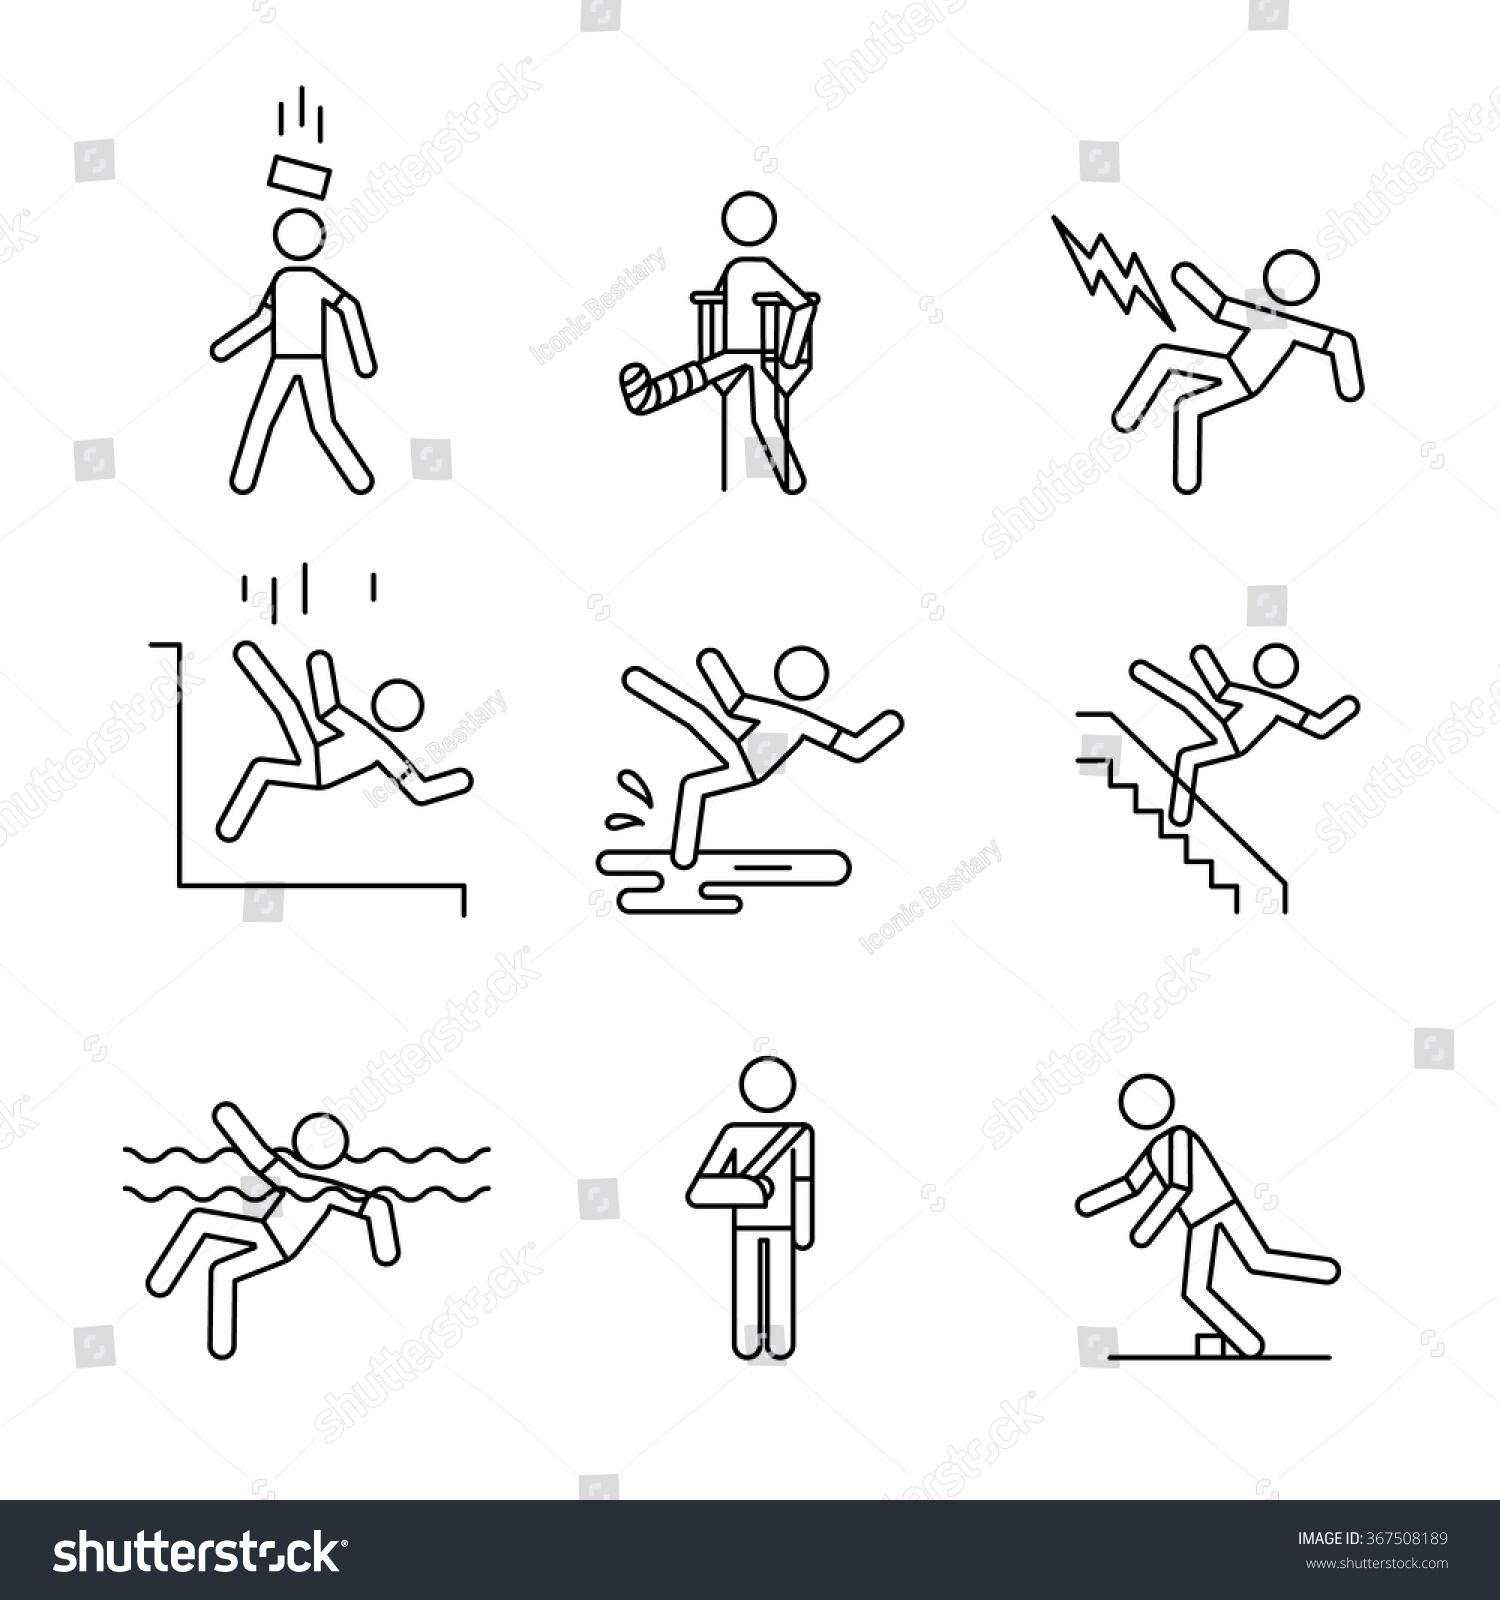 SVG of Man accident and traumas safety sign set. Thin line art icons. Linear style illustrations isolated on white. svg